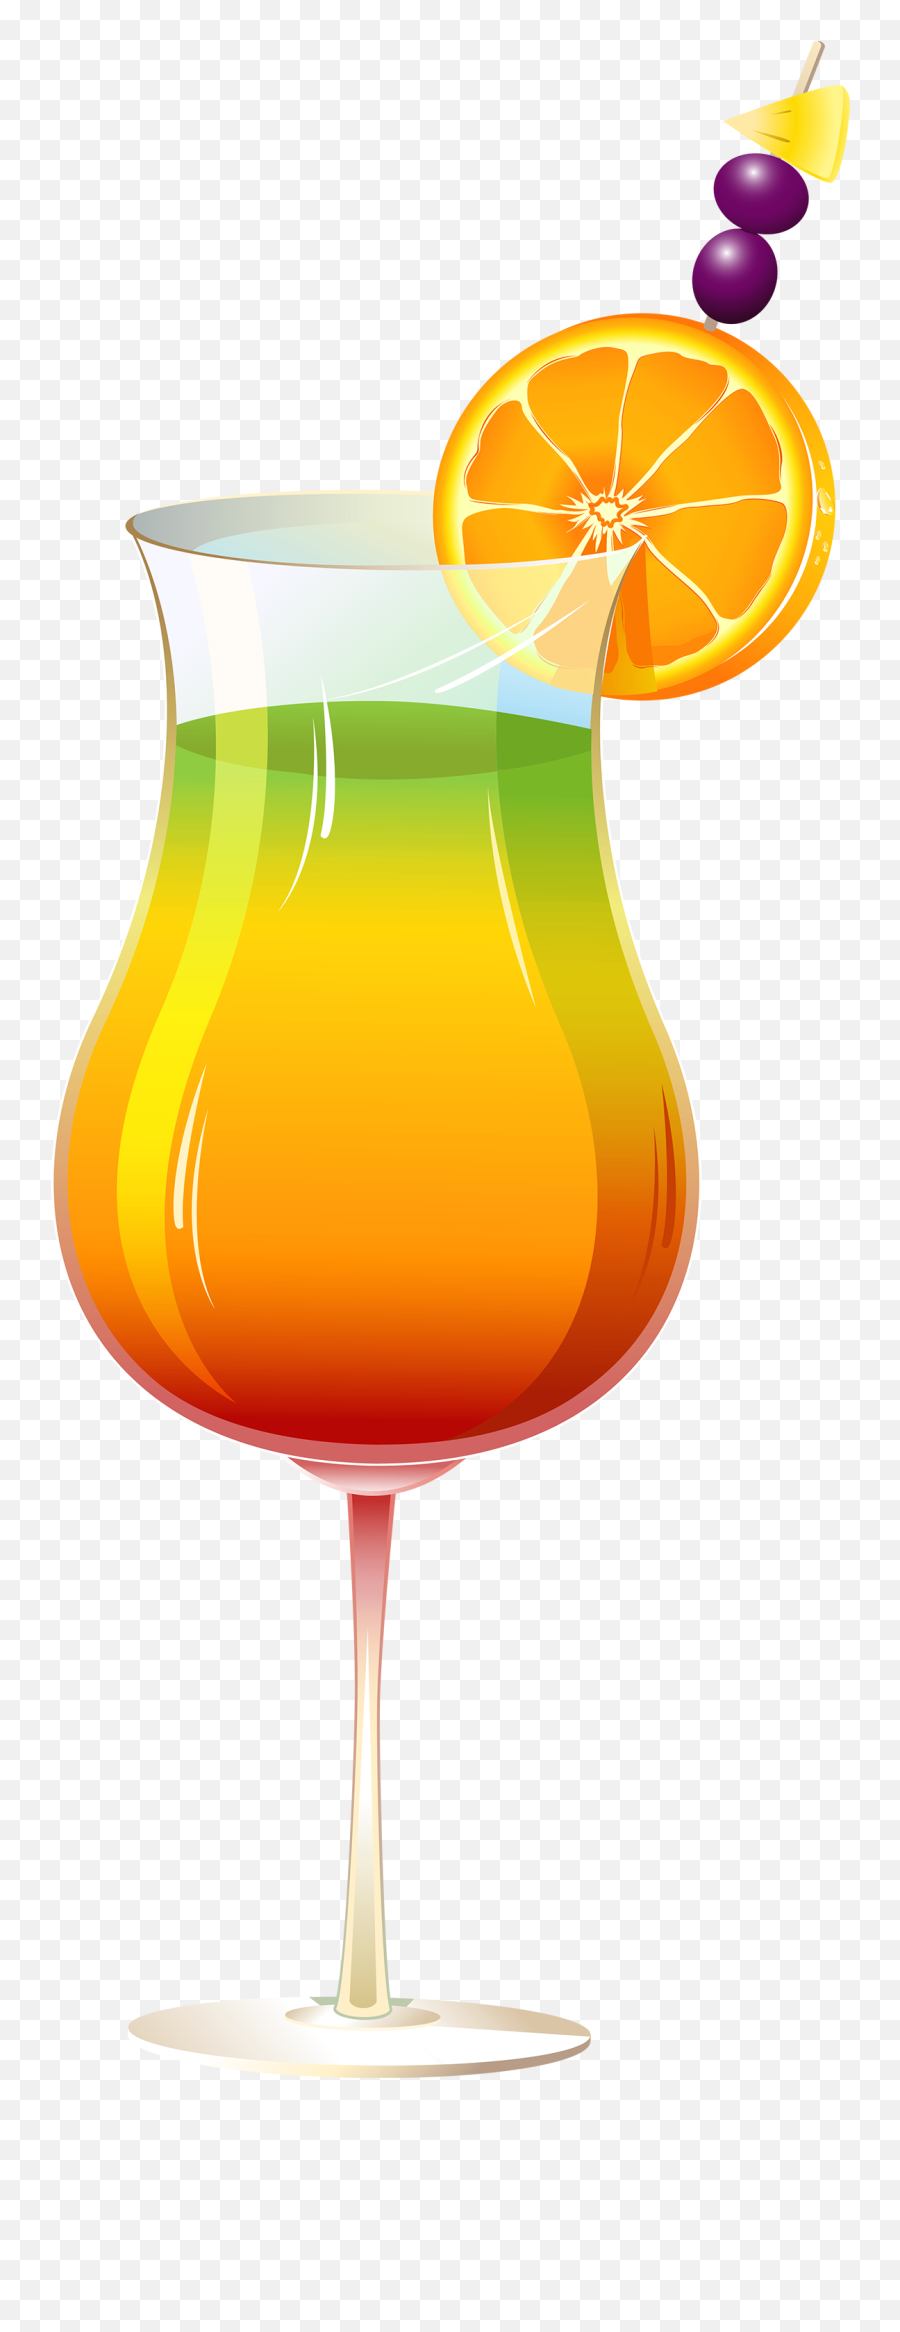 Exotic Cocktail Png Clipart Exotic - Clip Art Cocktail Drinks Emoji,Drinks Clipart